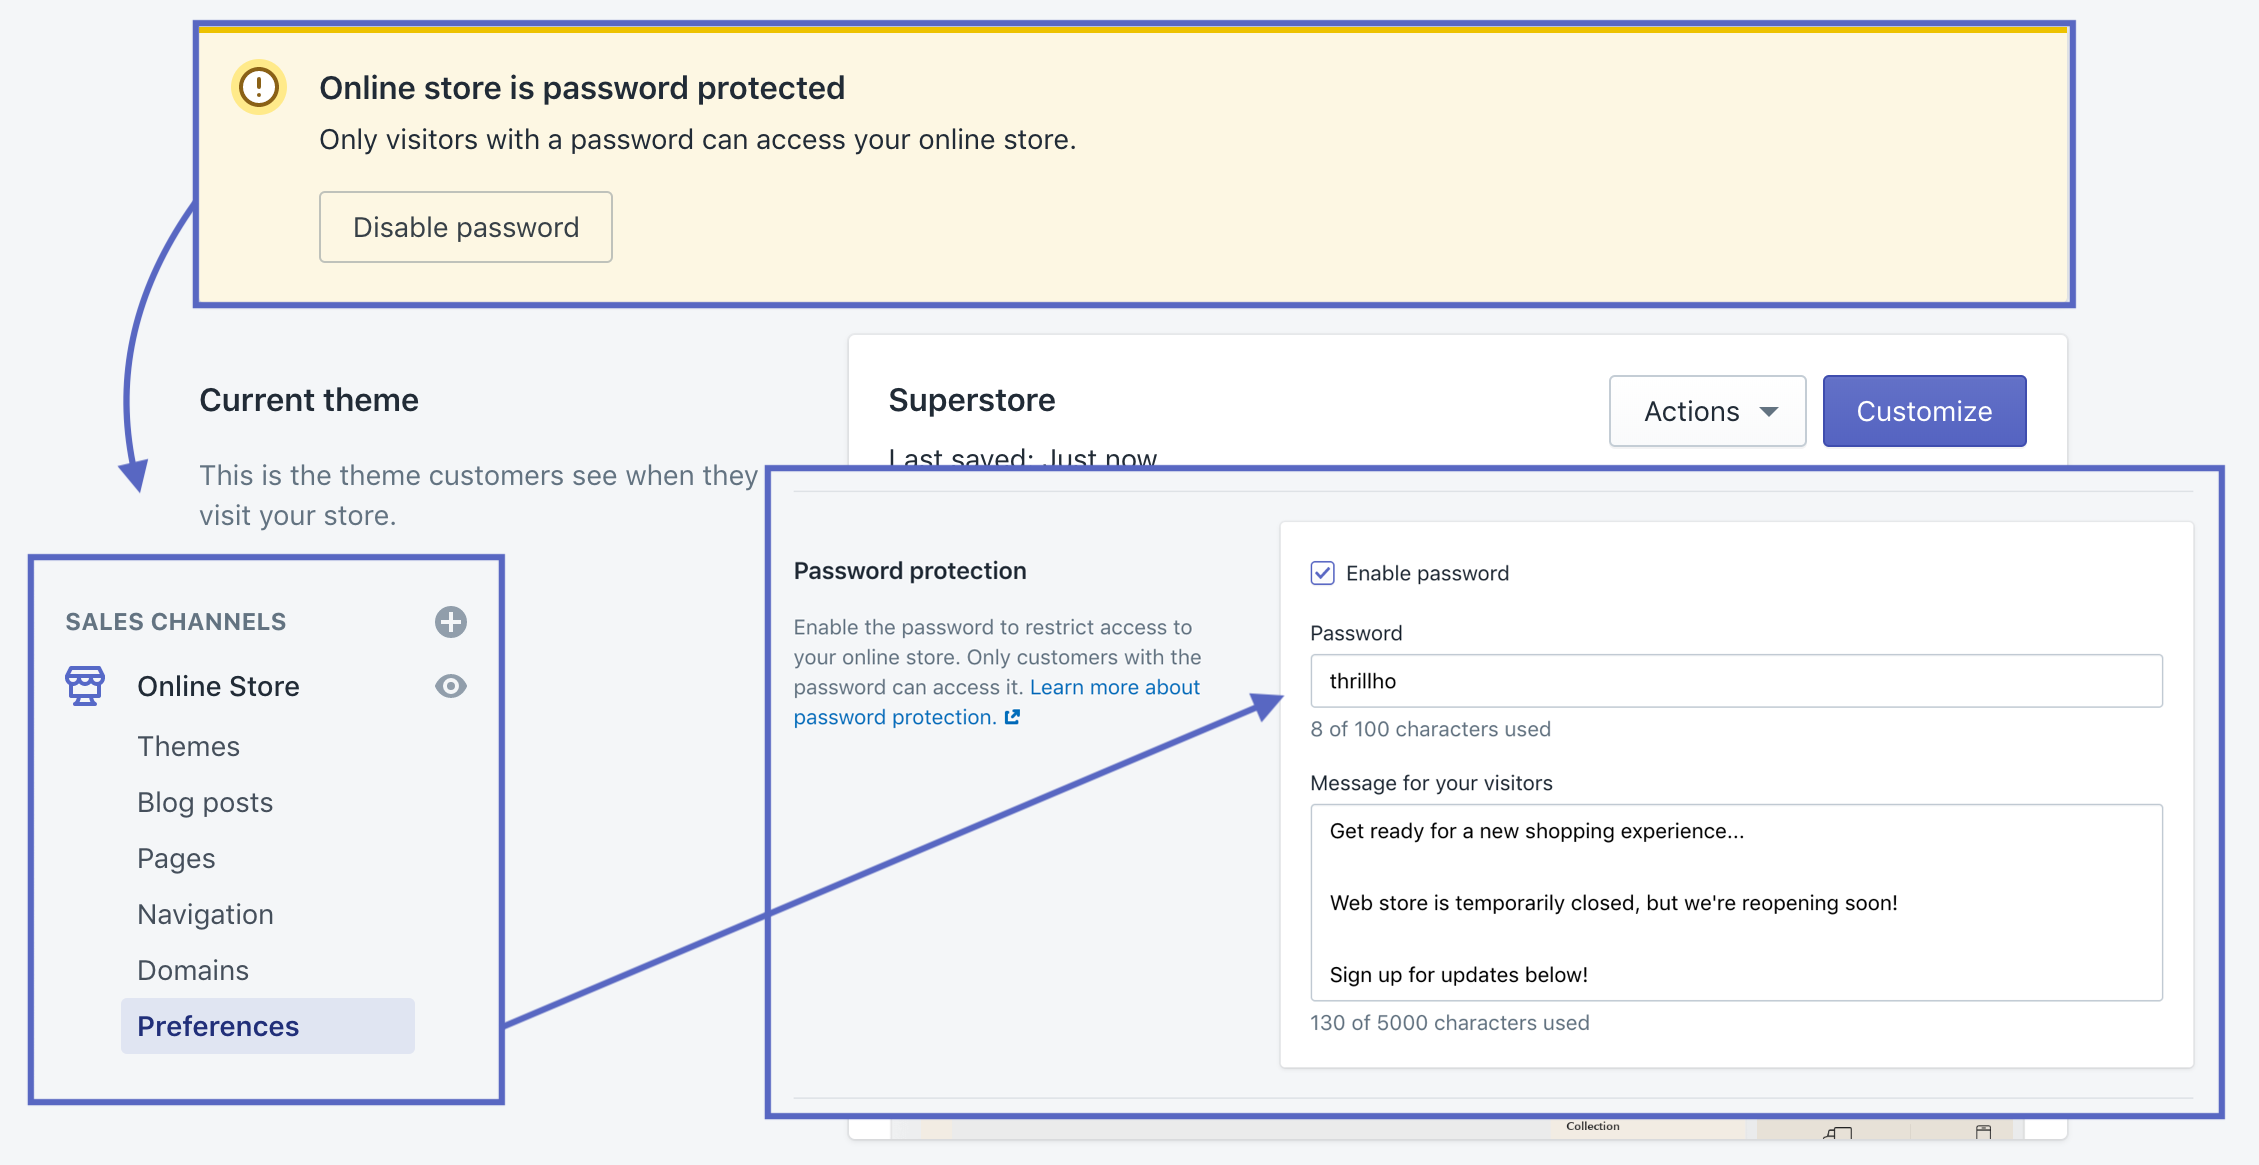 Online store password protection settings in the Shopify admin.